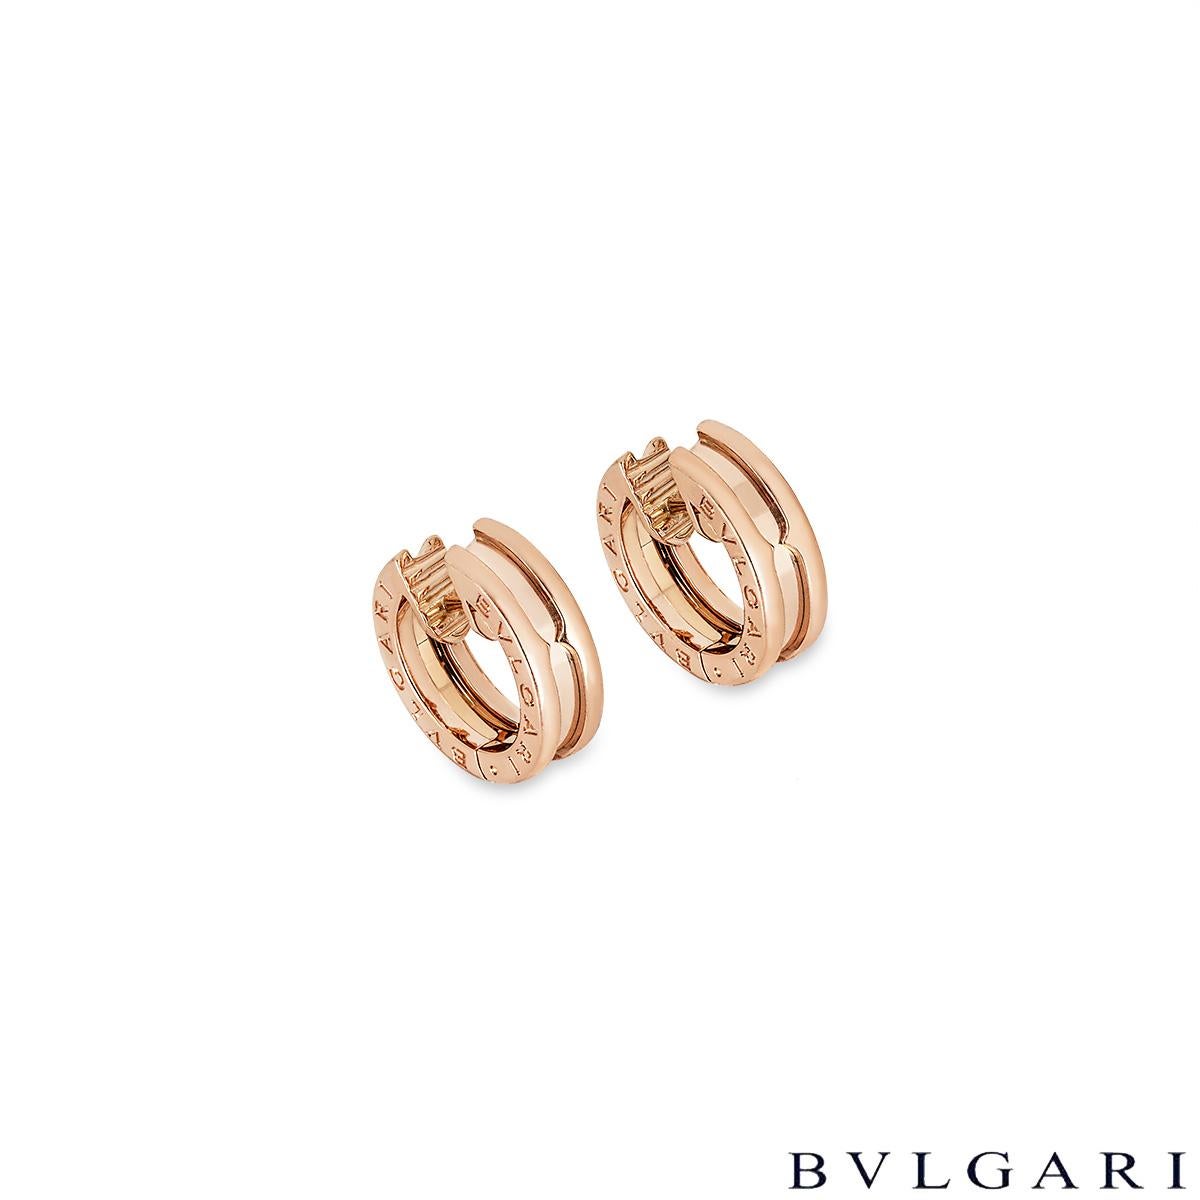 A pair of 18k rose gold hoop earrings by Bvlgari from the B.zero1 collection. The hoop earrings are each display the iconic Bvlgari Bvlgari logo engraved around the outer edges. The earrings measure 15mm in height and are 5mm wide and feature post